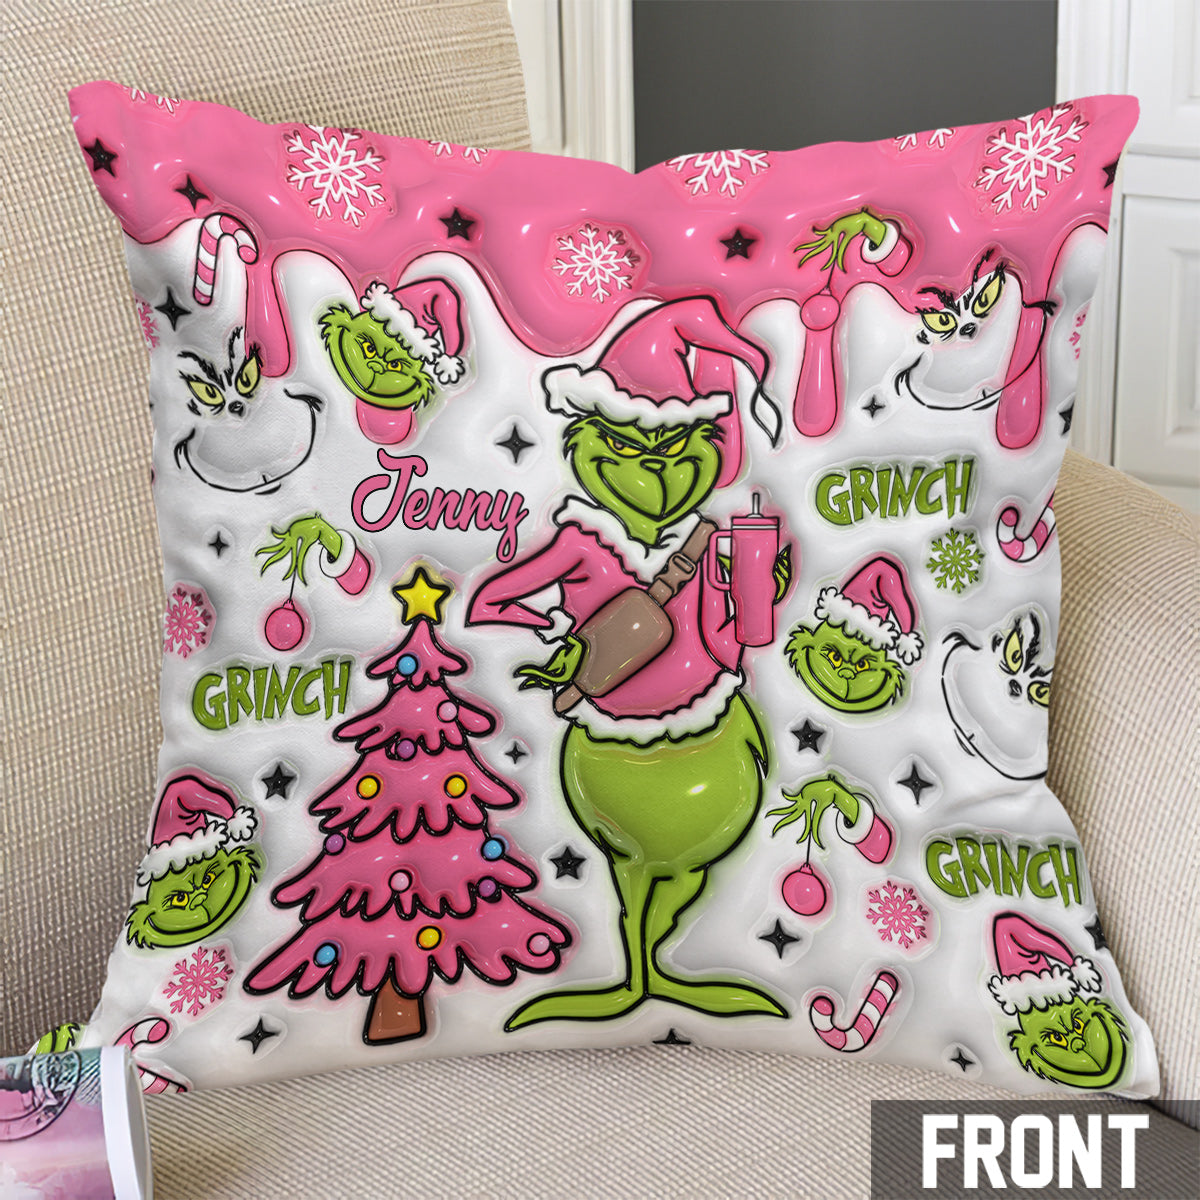 Merry Grinchmas - Personalized Stole Christmas Throw Pillow